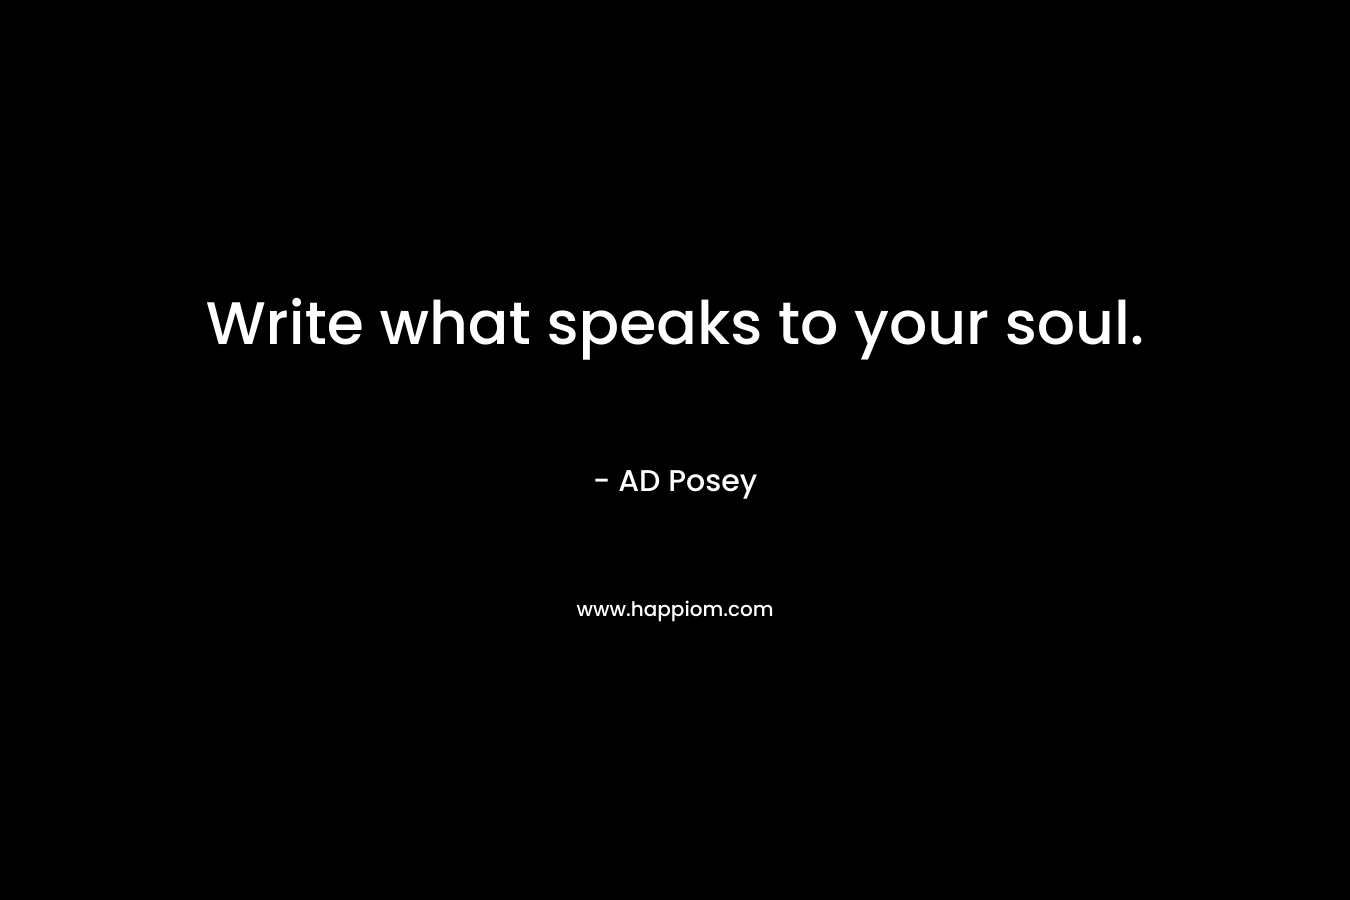 Write what speaks to your soul.